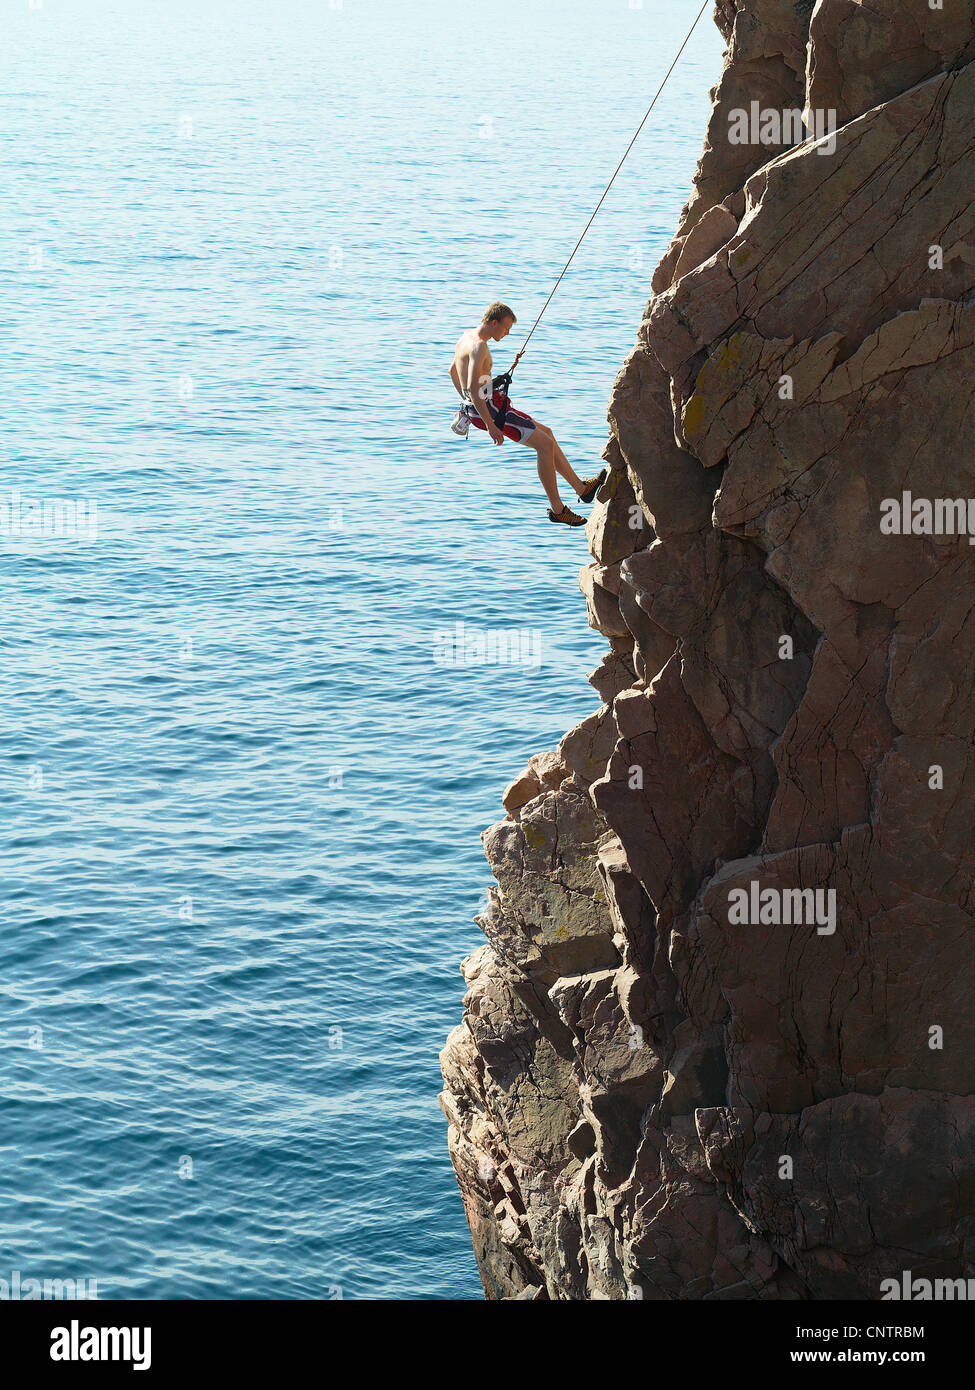 Rock climber rappelling down rock face Stock Photo